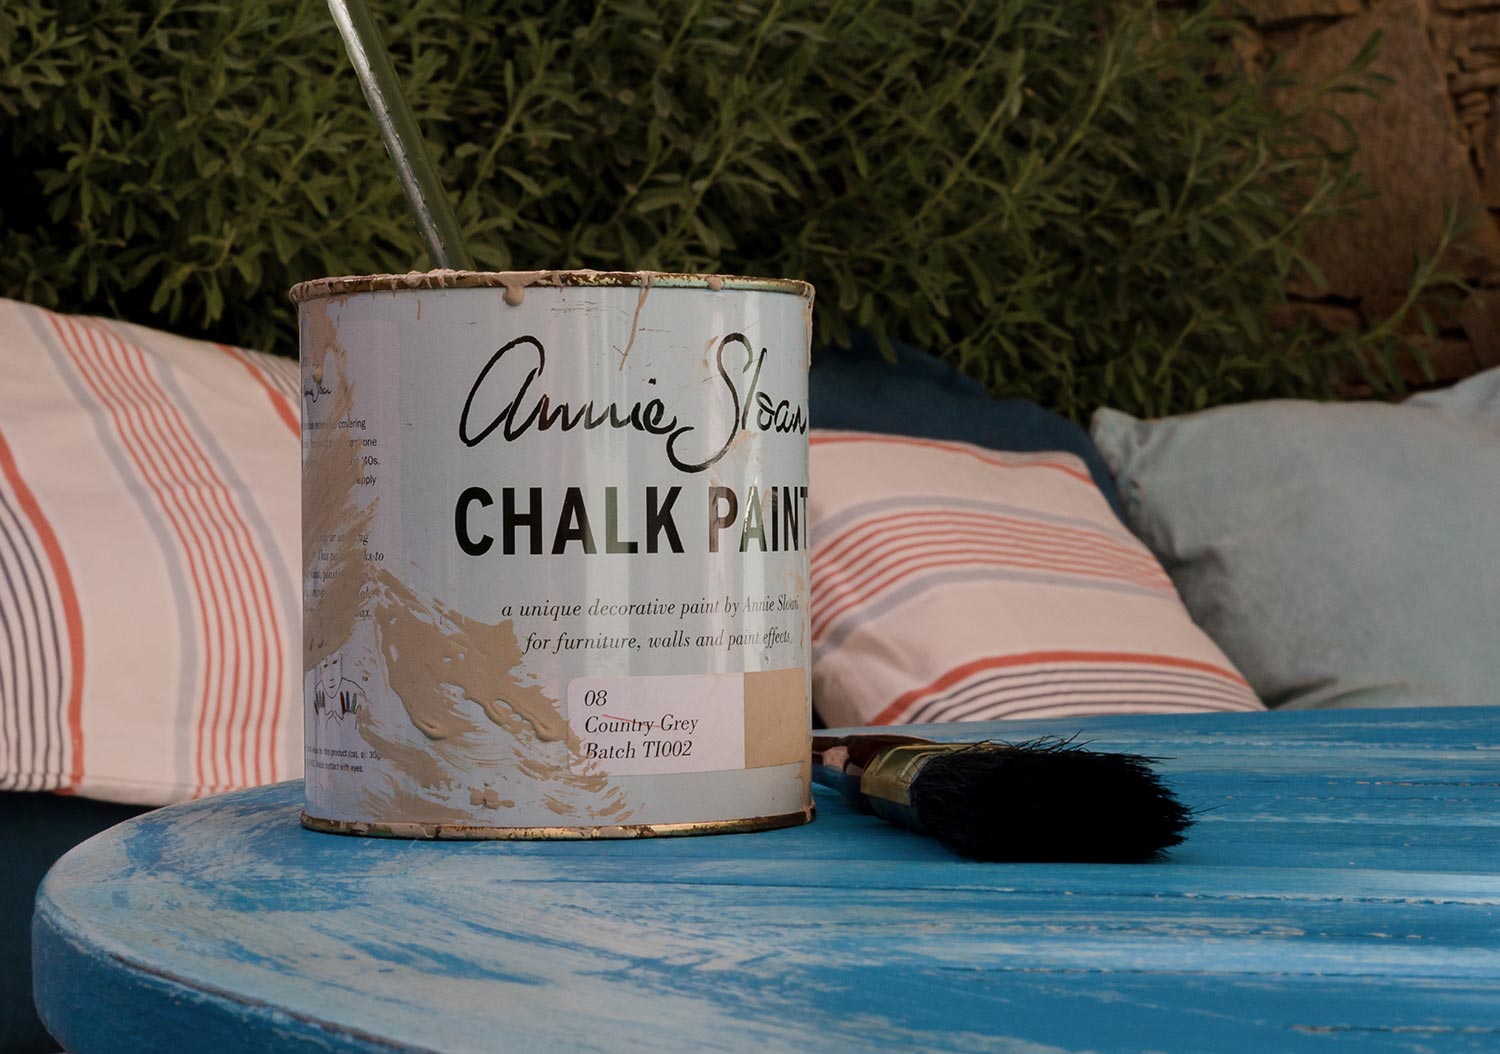 A tin of country grey Annie Sloan chalk paint on the vintage table next to the paintbrush